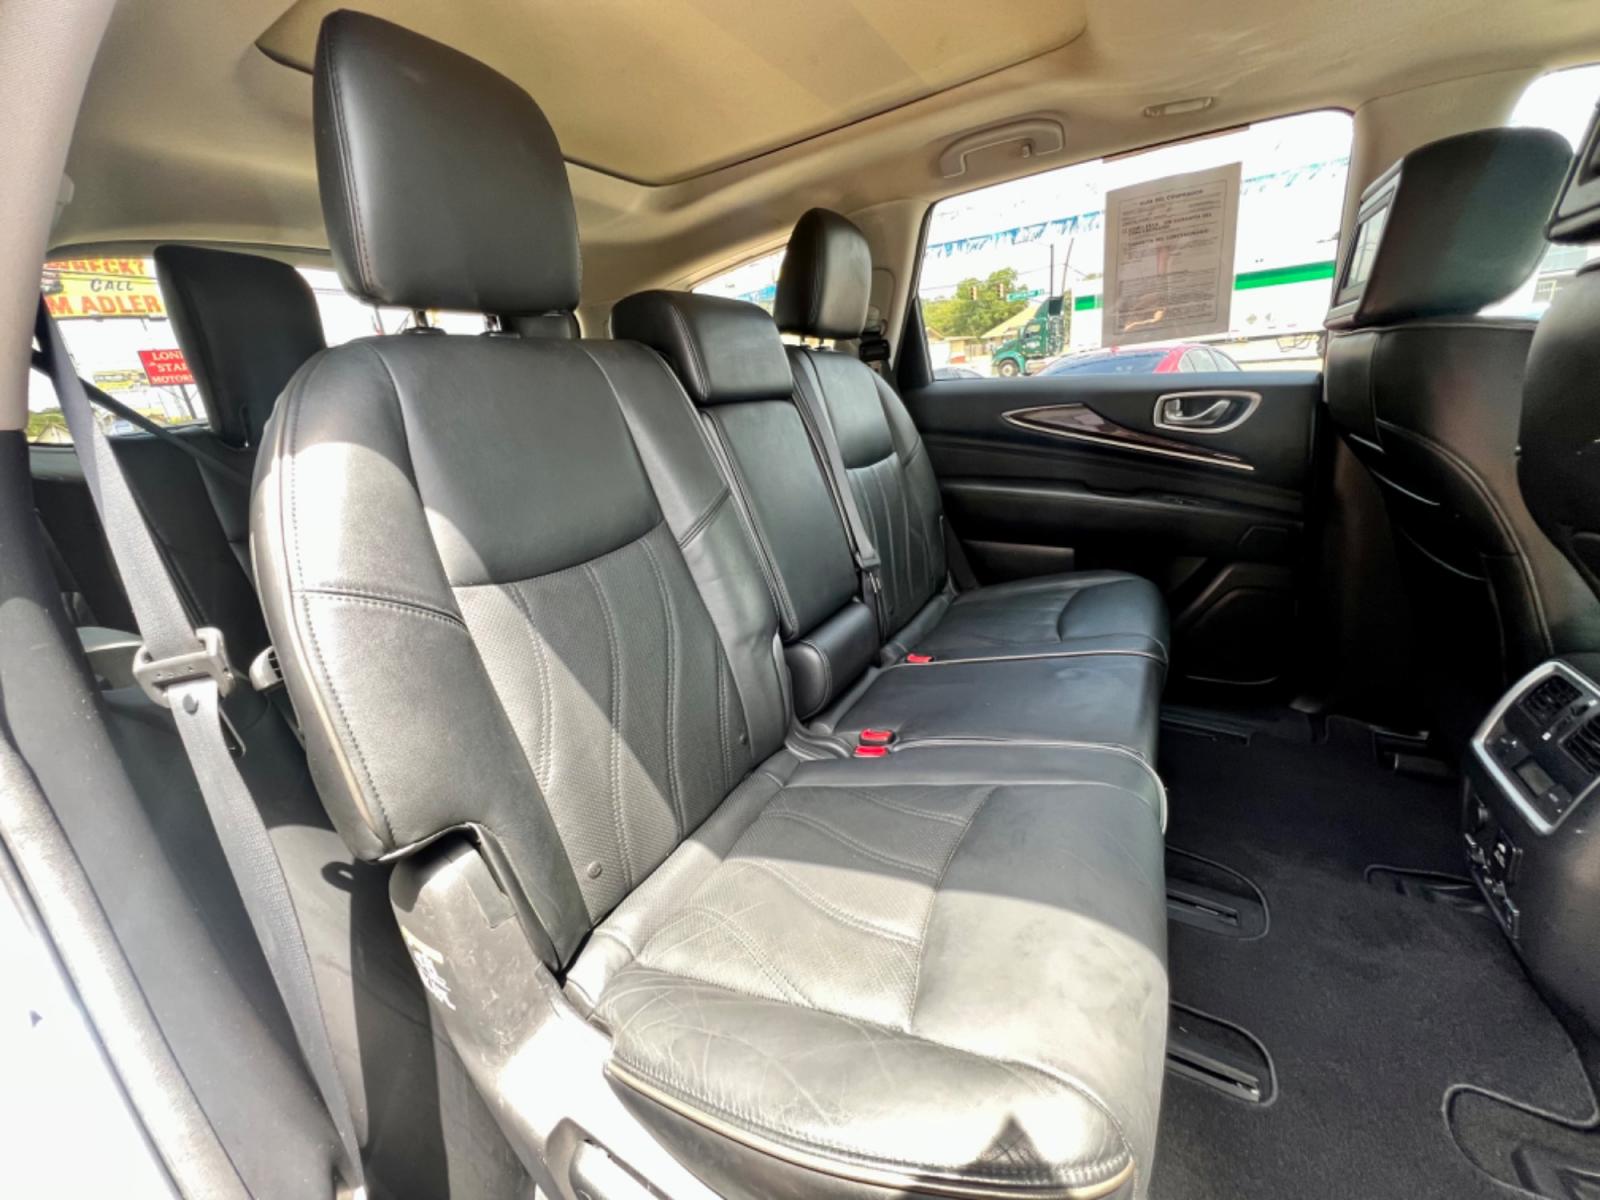 2013 SILVER INFINITI JX35 (5N1AL0MM3DC) , located at 5900 E. Lancaster Ave., Fort Worth, TX, 76112, (817) 457-5456, 0.000000, 0.000000 - This is a 2013 INFINITI JX35 4 DOOR SUV that is in excellent condition. There are no dents or scratches. The interior is clean with no rips or tears or stains. All power windows, door locks and seats. Ice cold AC for those hot Texas summer days. It is equipped with a CD player, AM/FM radio, AUX port - Photo #14